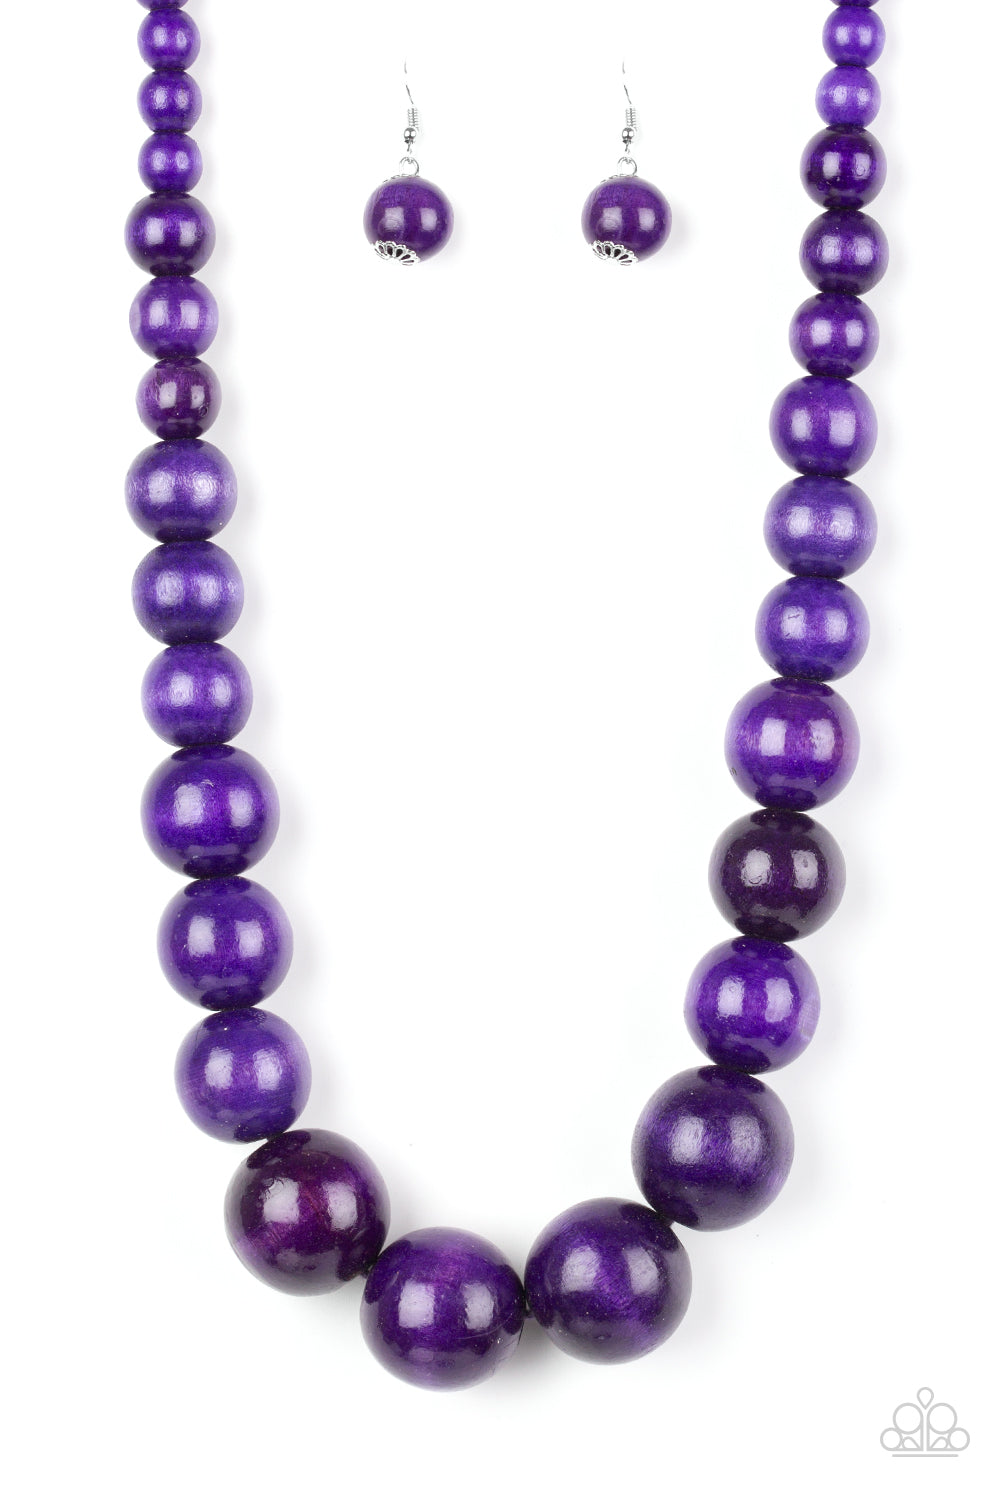 Gradually increasing in size near the center, vivacious purple wooden beads are threaded along a purple string for a summery look. Features an adjustable sliding knot closure.